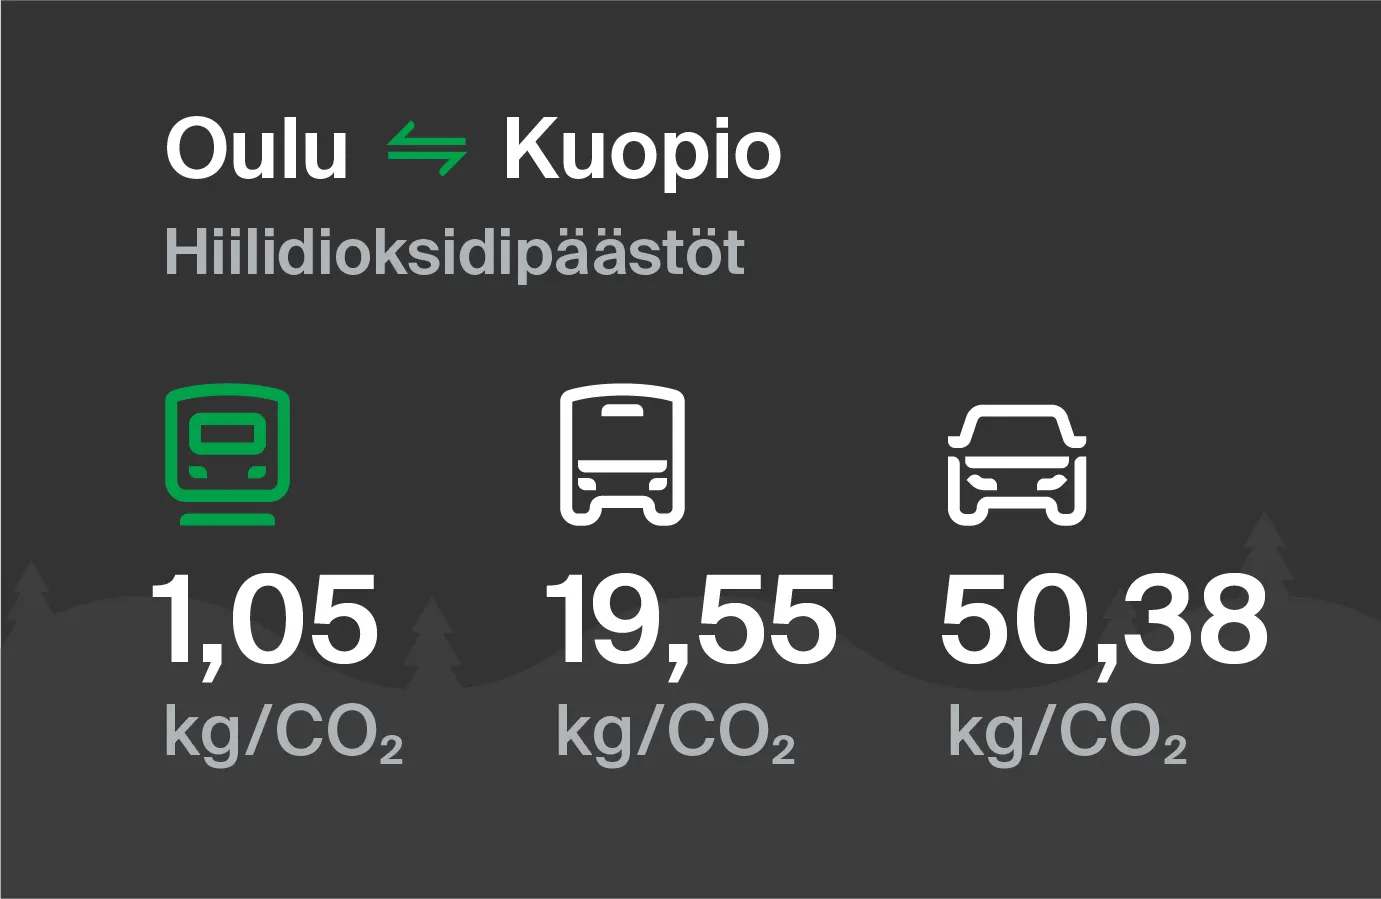 Carbon dioxide emissions from Oulu to Kuopio by different modes of transport: by train 1.05 kg/CO2, by bus 19.55 kg/CO2 and by car 50.38 kg/CO2.